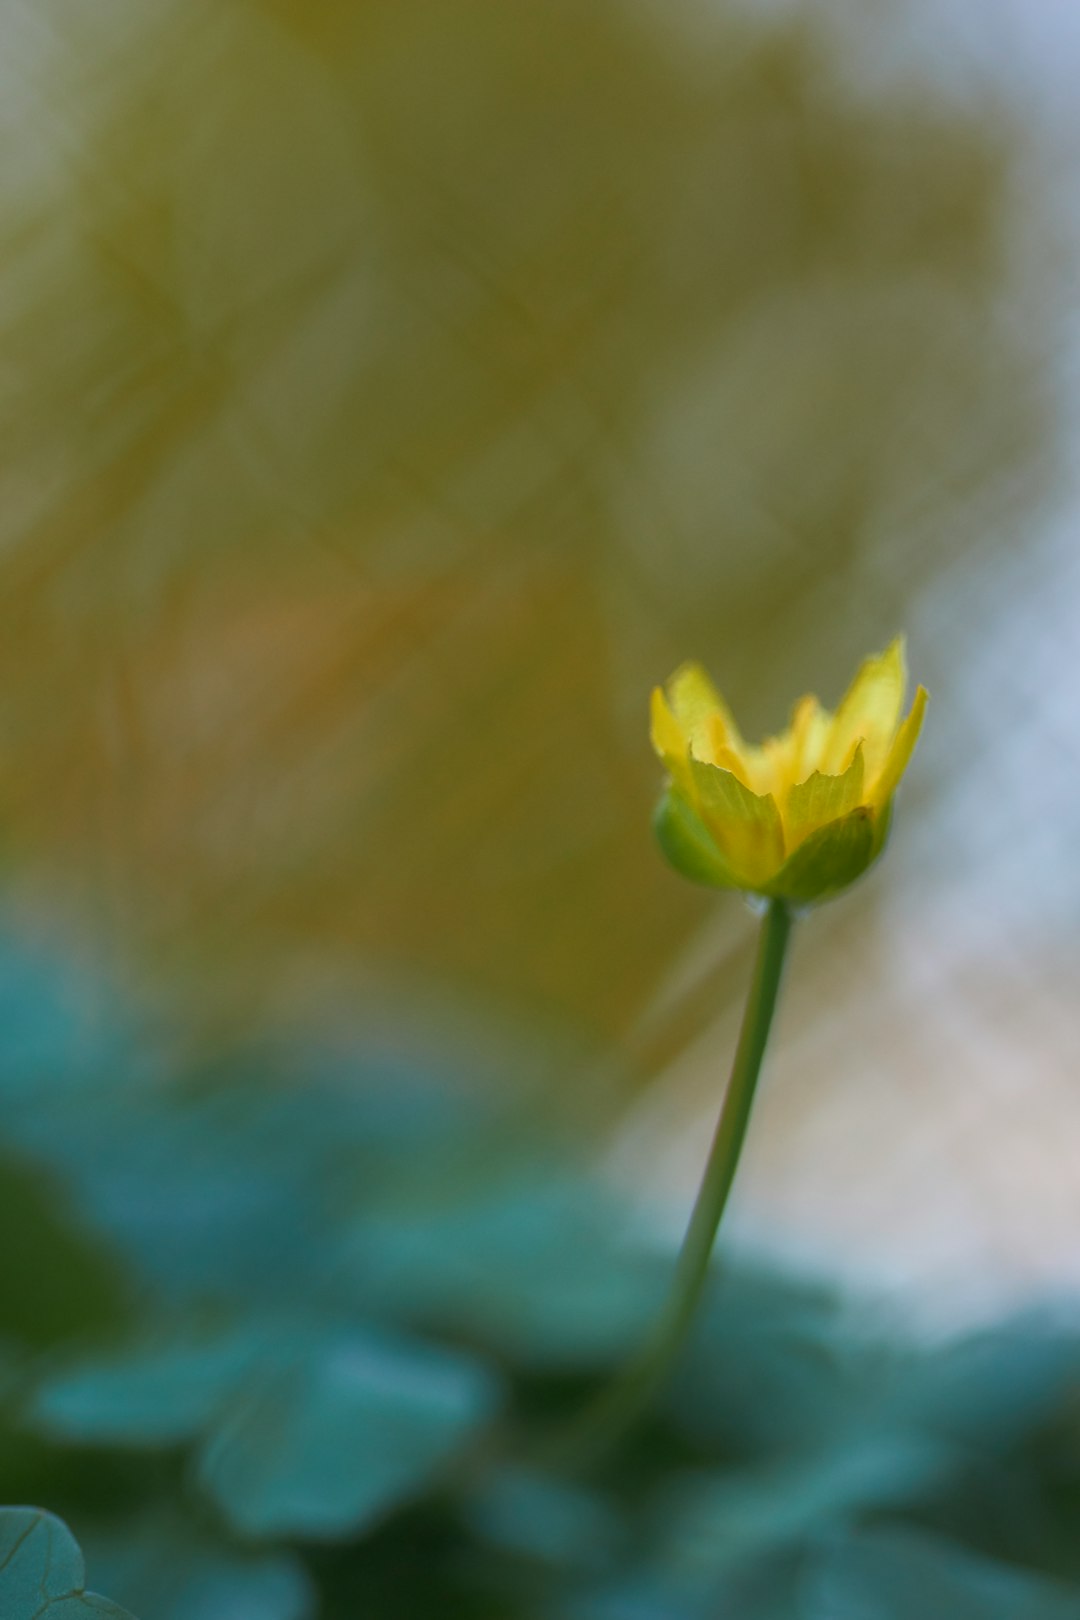 blurry photography of yellow-petaled flower